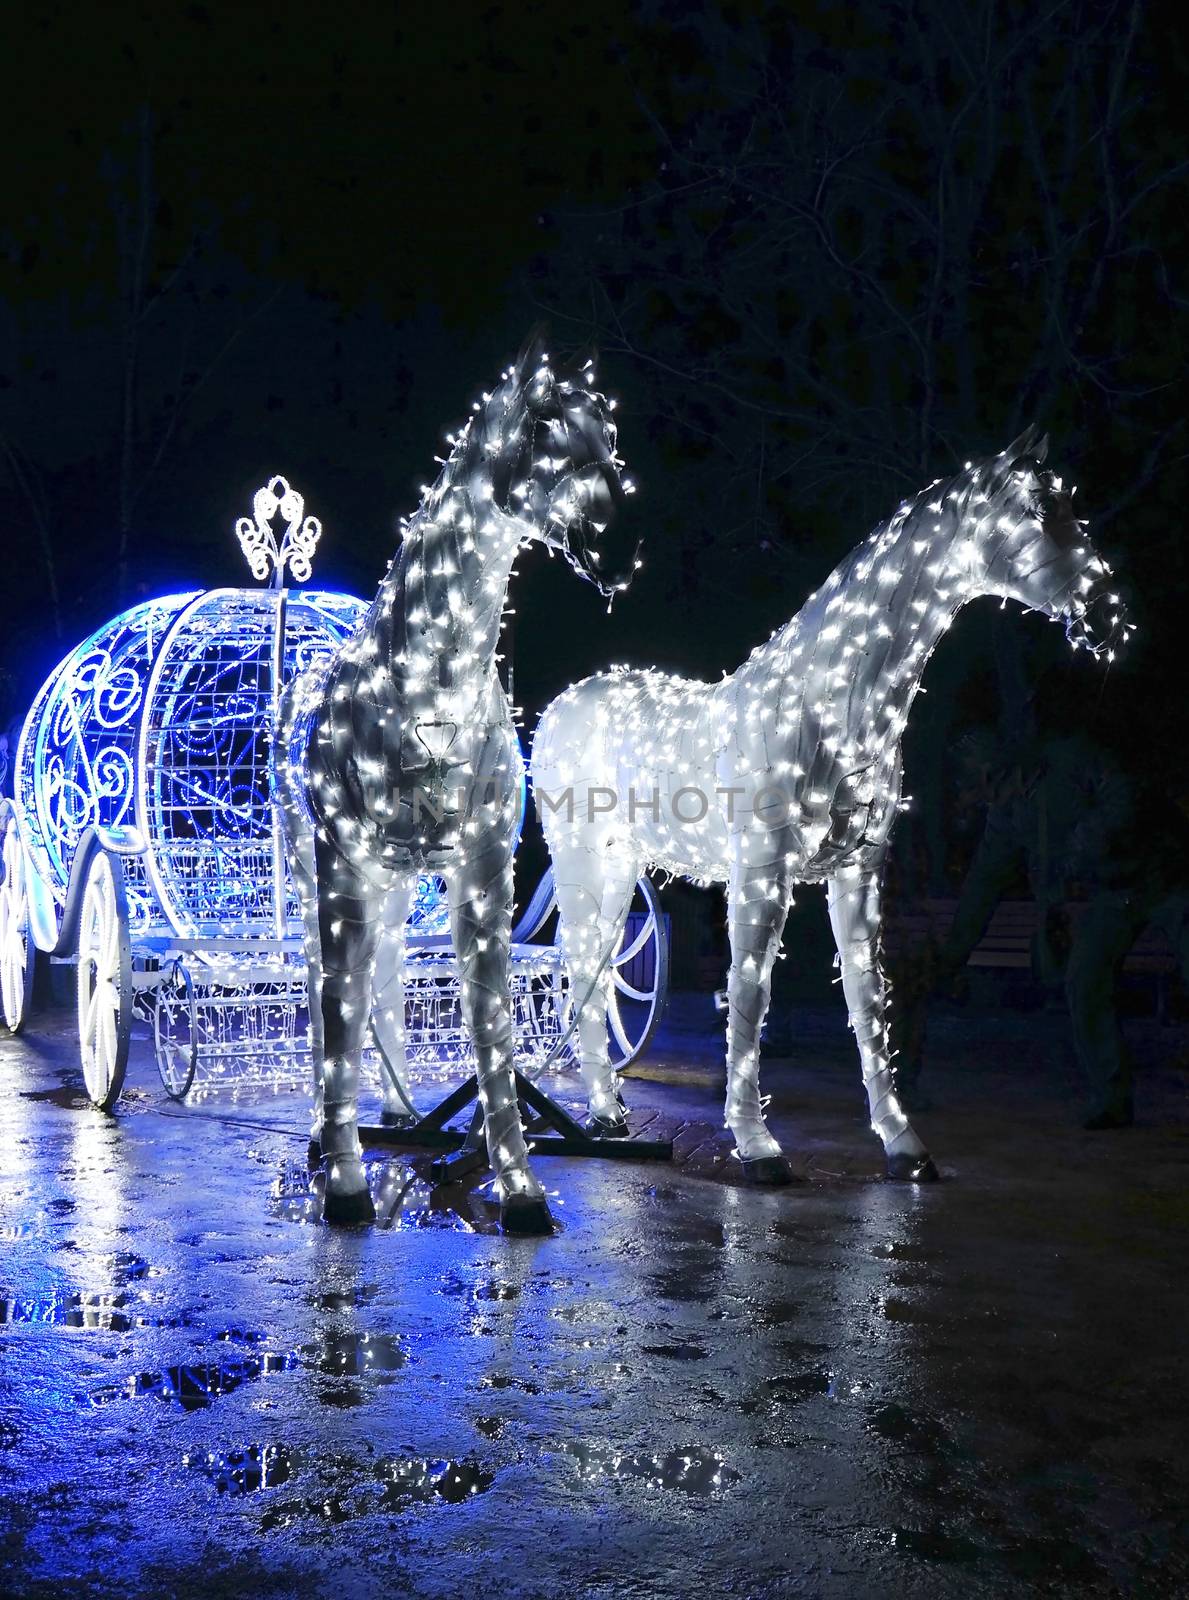 Decorative carriage with horses decorated with lights            by Chiffanna